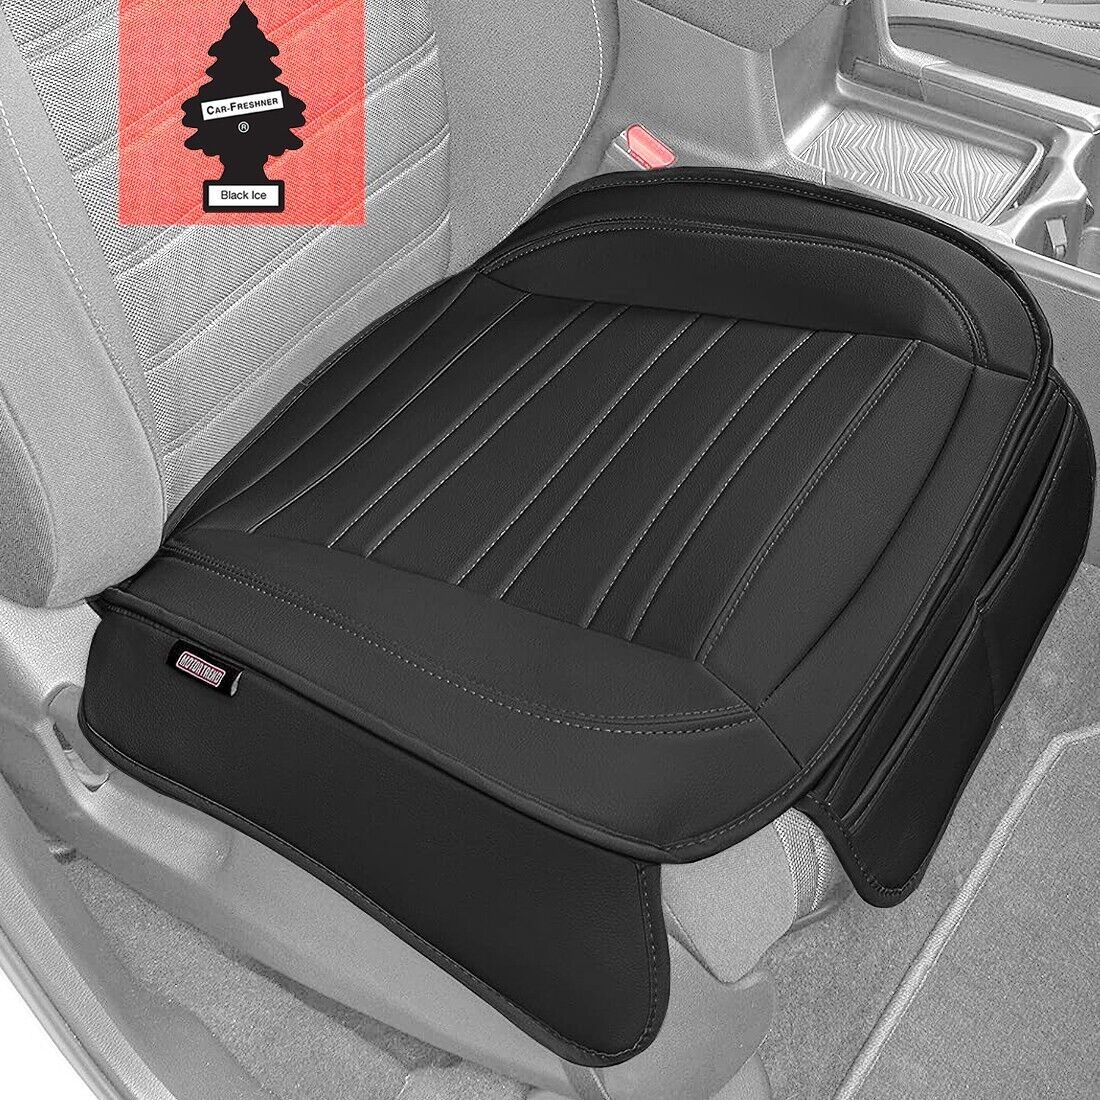 Primary image for For HONDA MotorTrend Black Faux Leather Car Seat Cover Cushion and Air Freshener